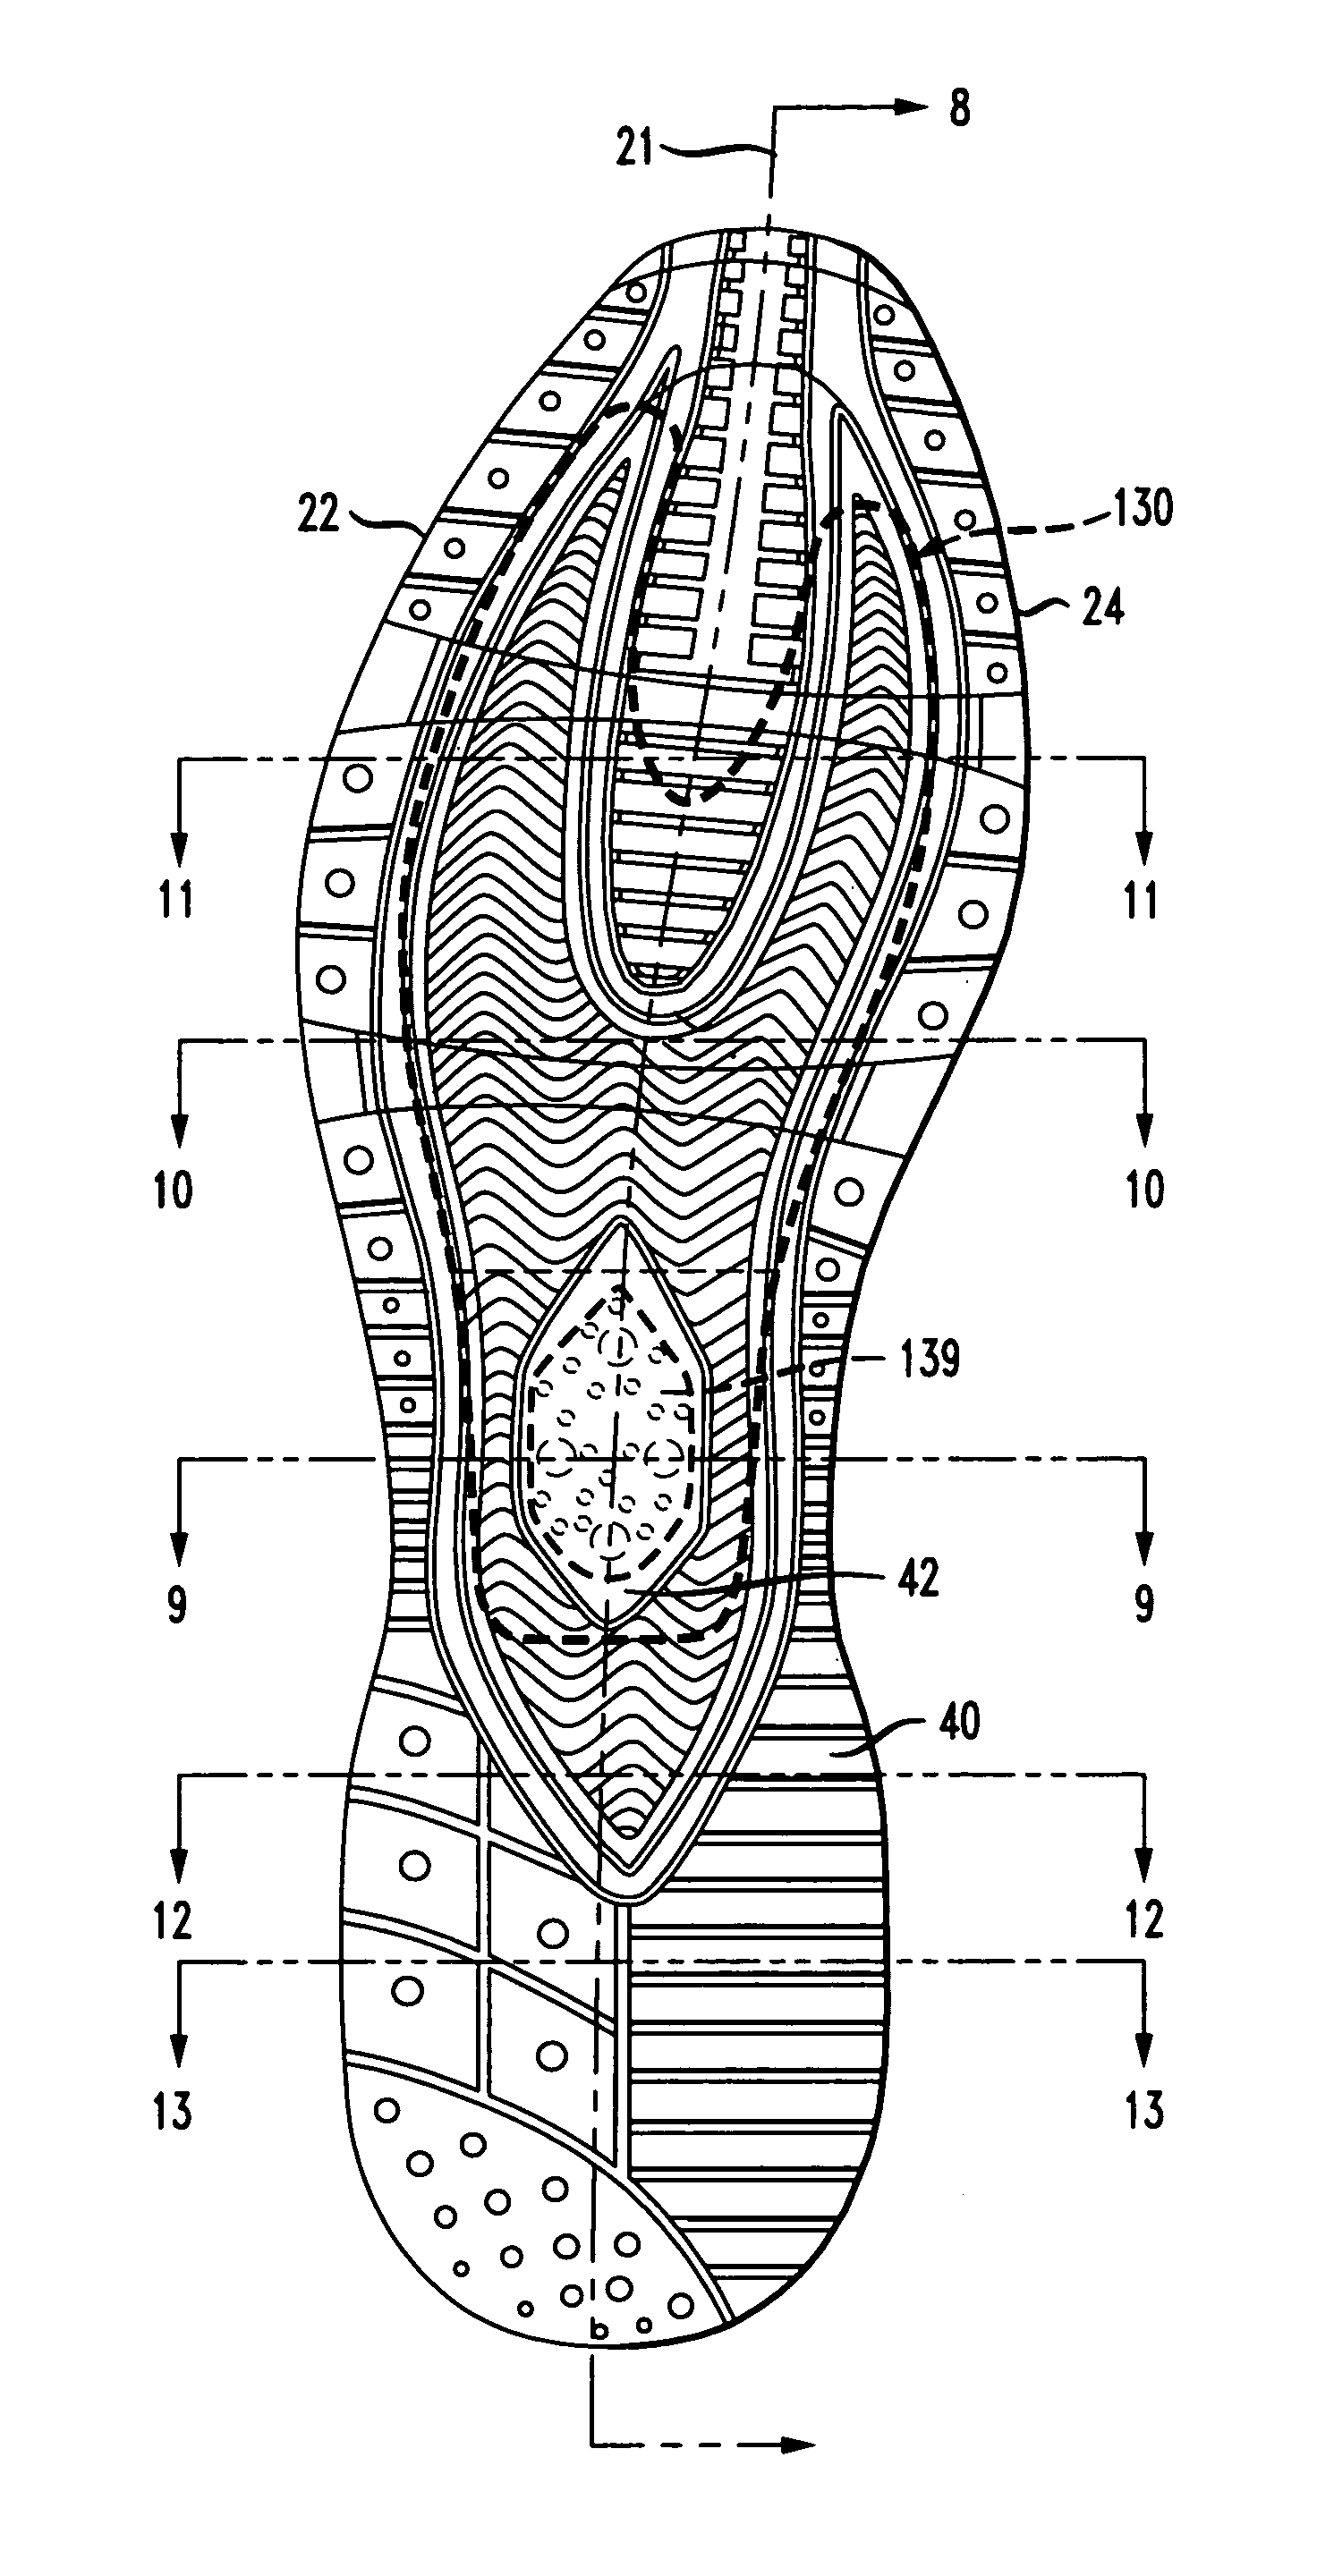 Article of footwear having an embedded plate structure